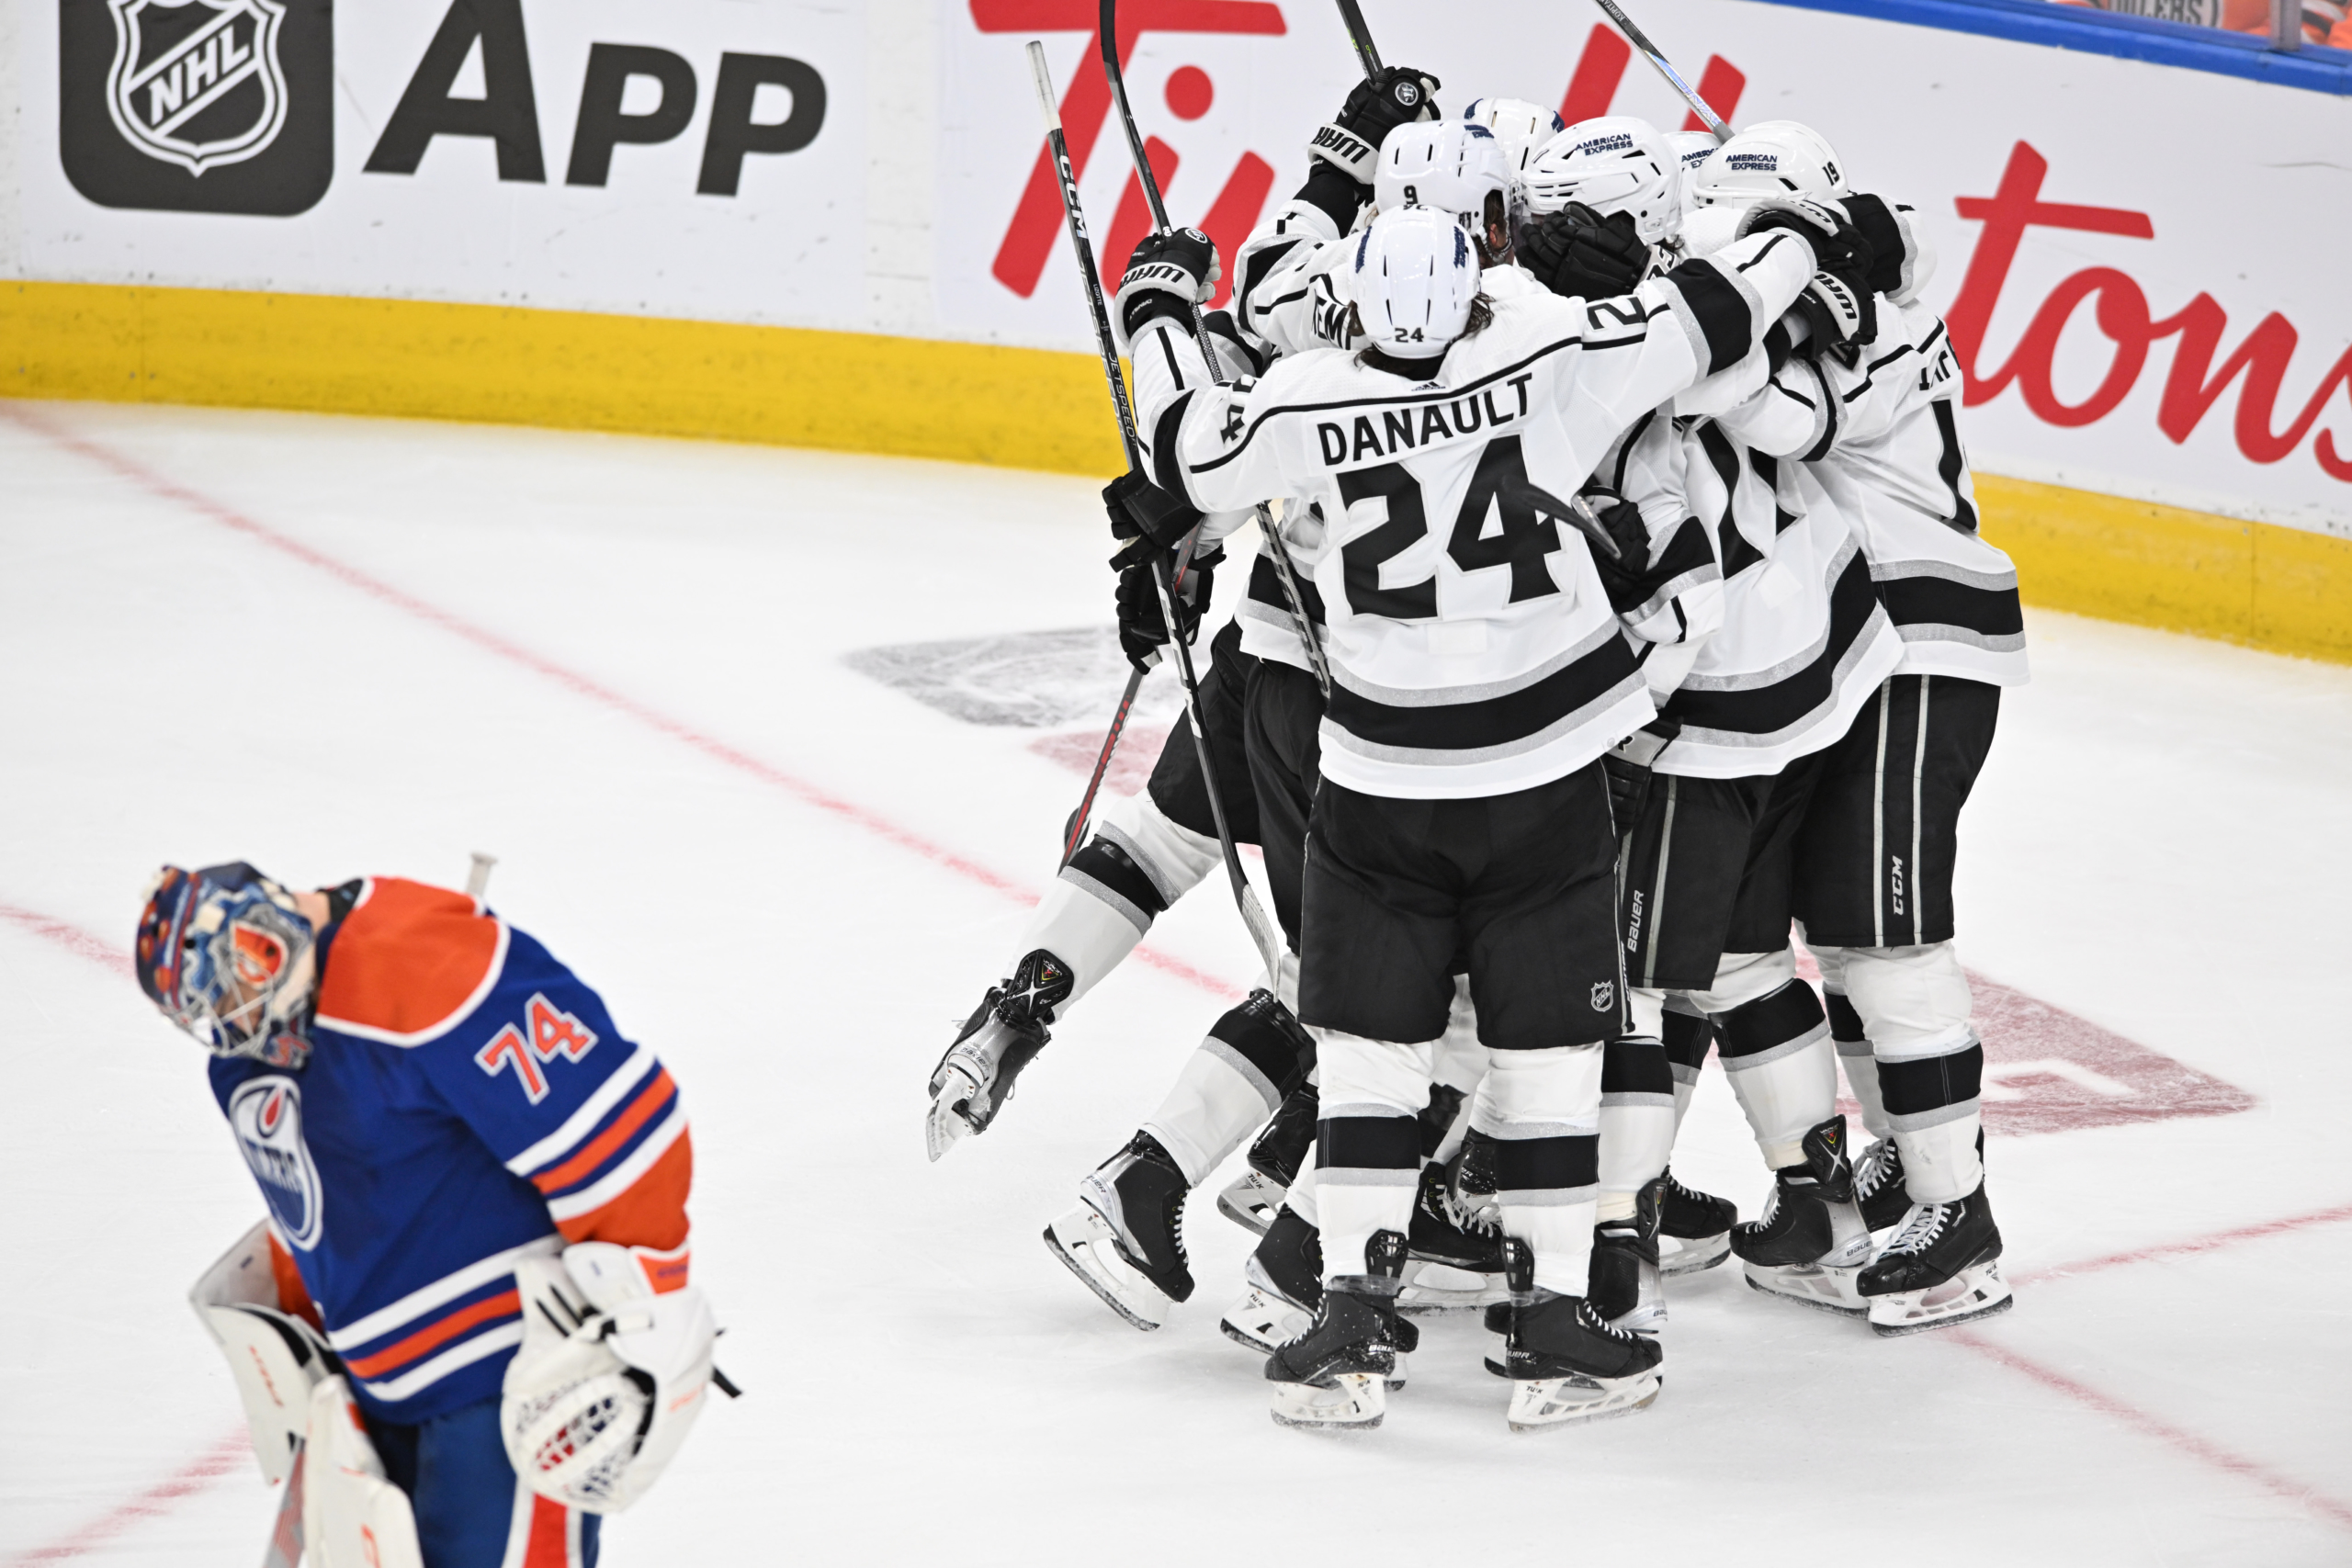 Edmonton Oilers down L.A. Kings 2-0, advance to second round of